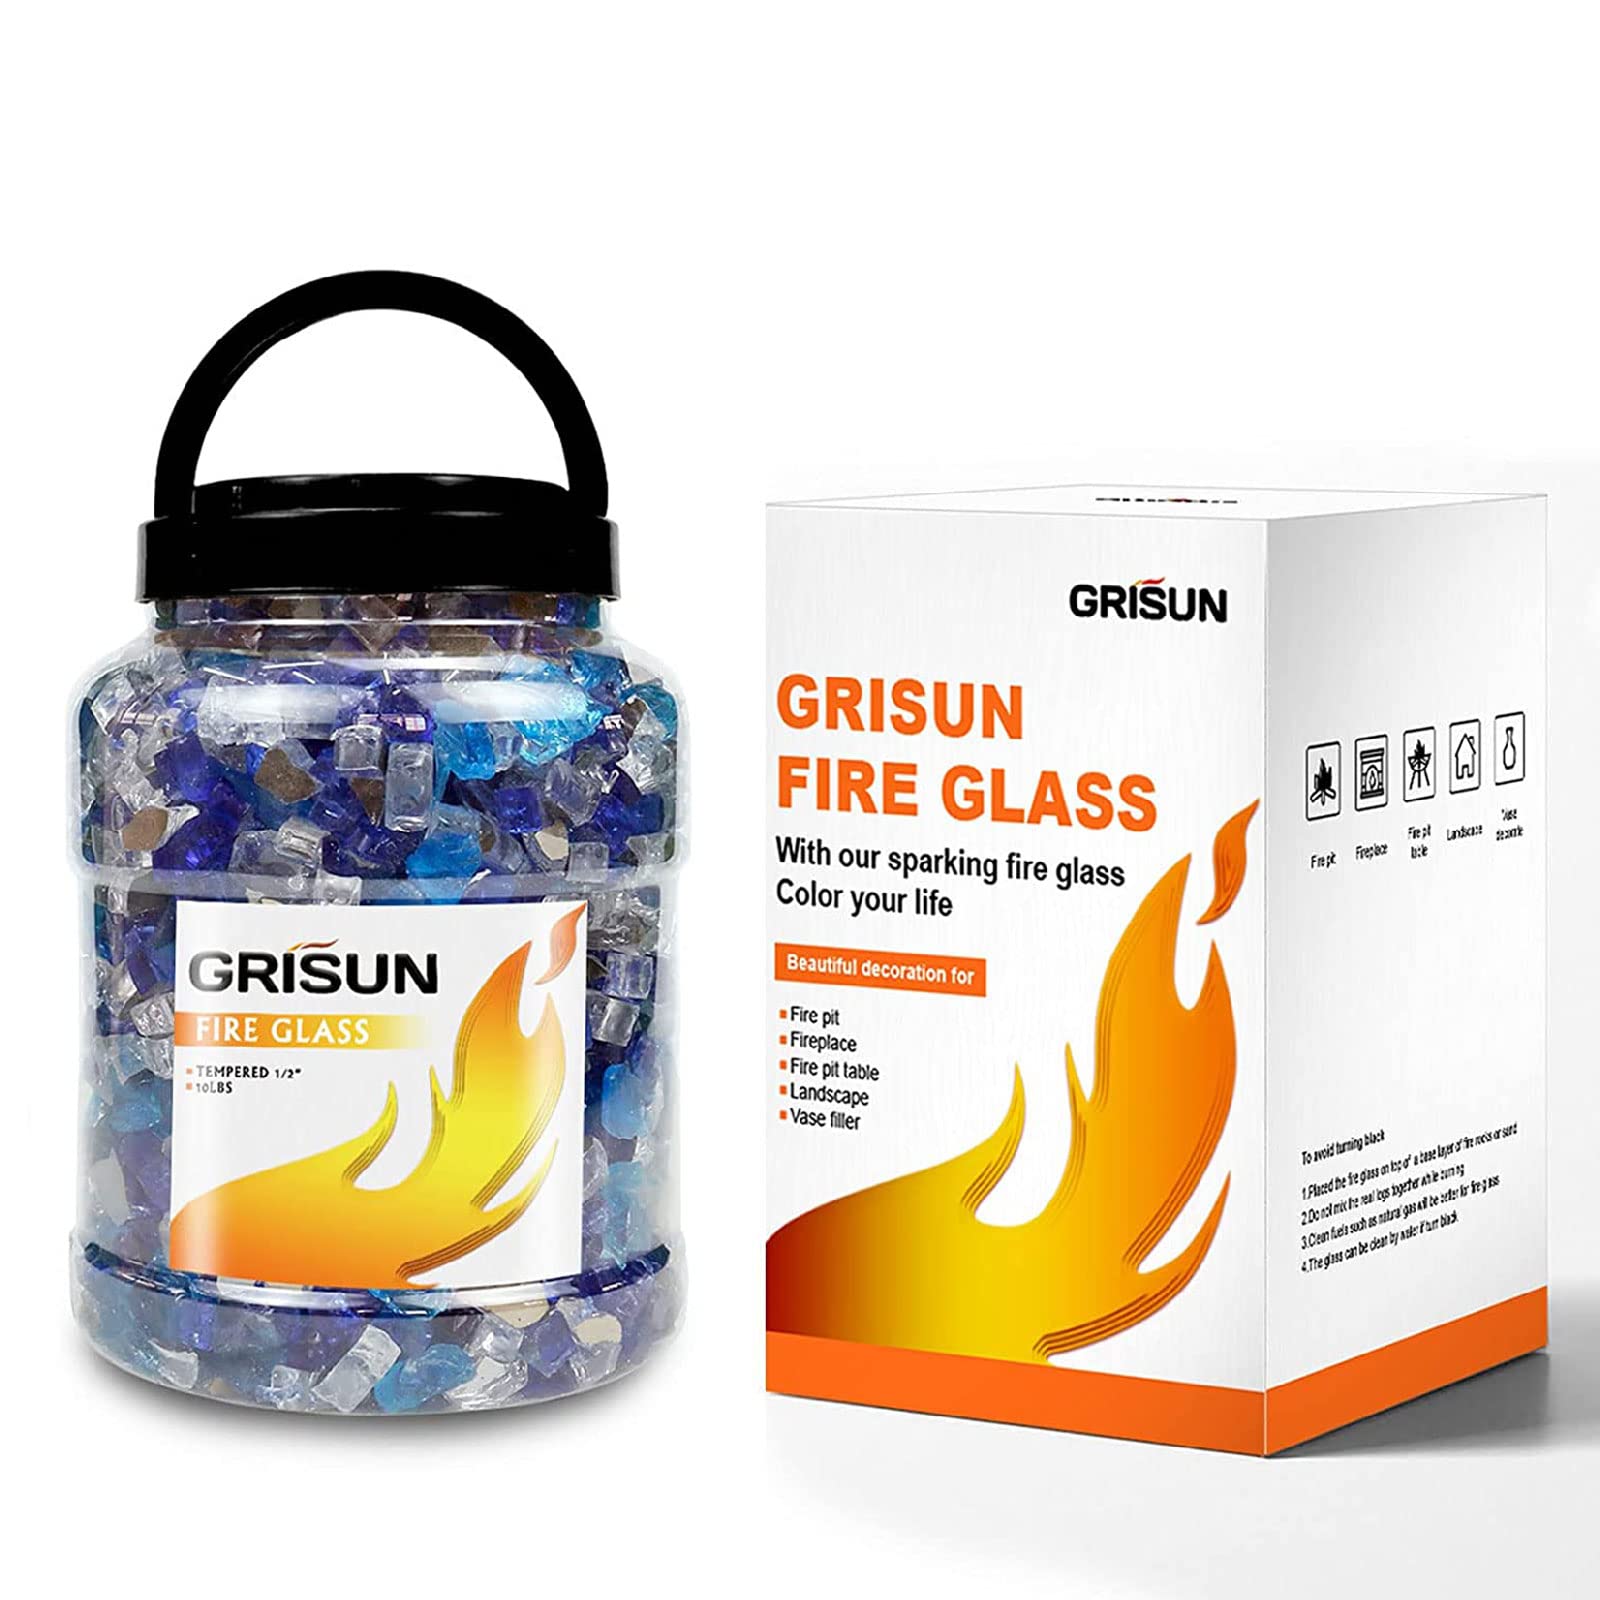 Grisun Fire Glass with Drop-in Fire Pit Kit 18 x 18 Inch, Round Burner with Tray, Come with Upgraded Spark Ignition Kit for Gas Fire Pit, Fire Table